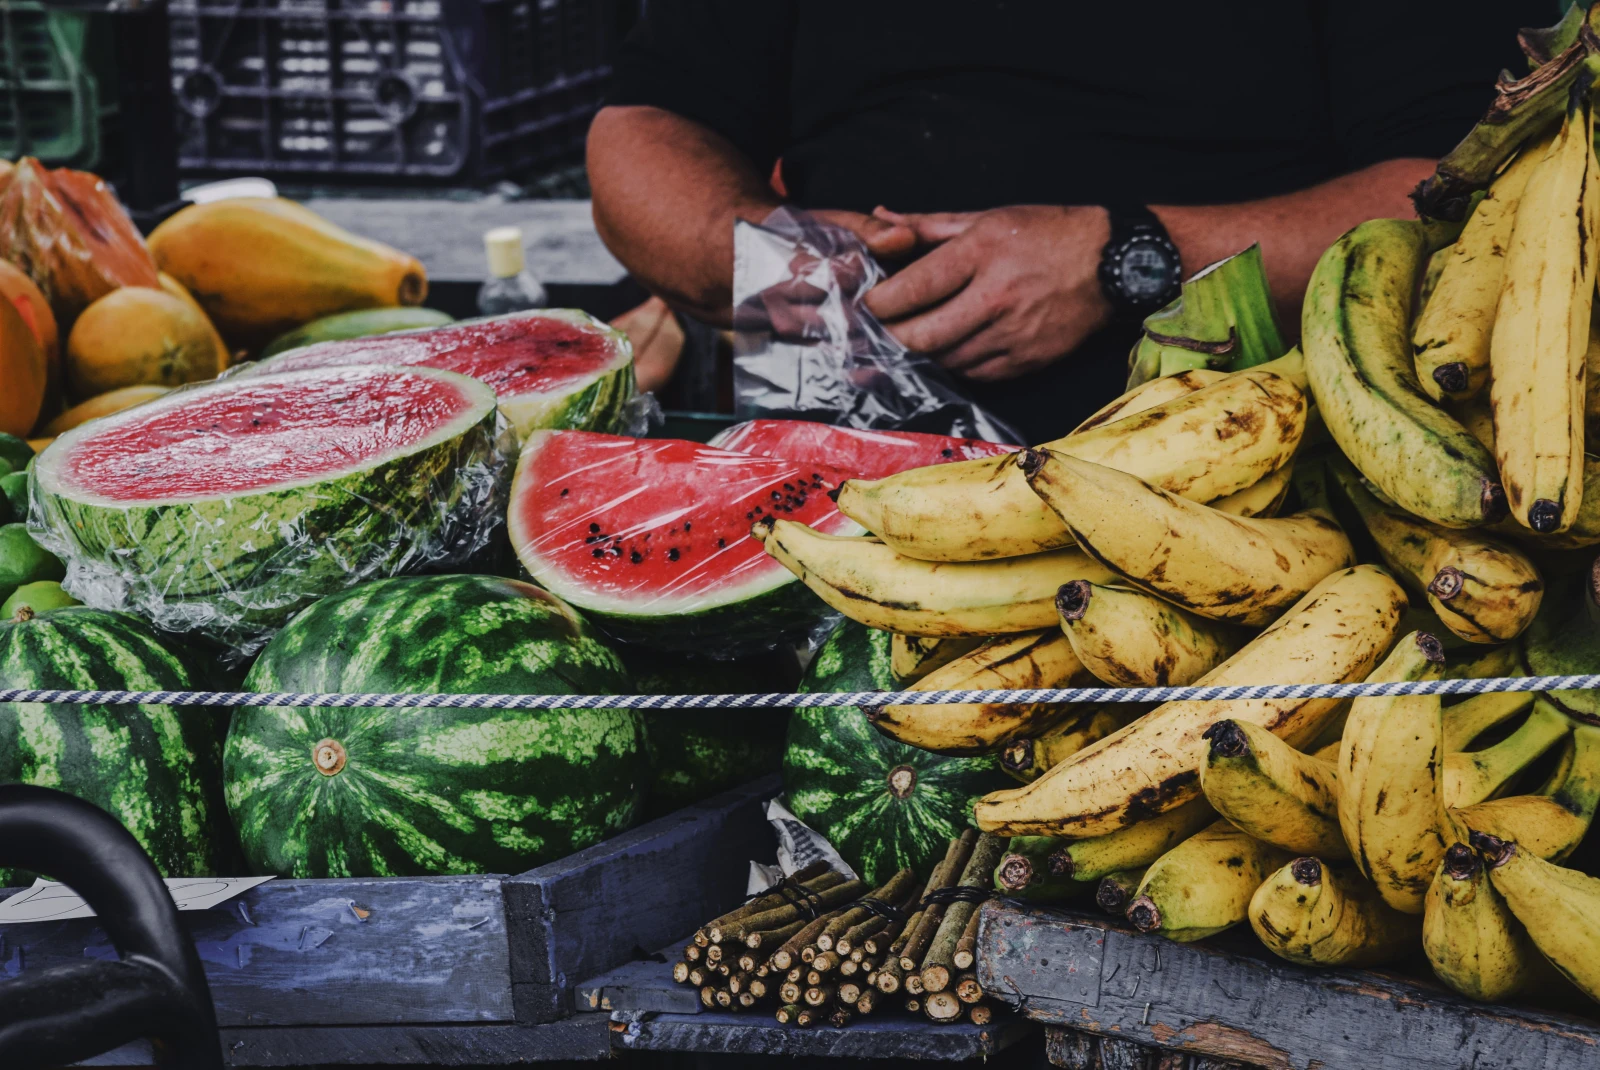 Bananas and watermelon at a fruit stand during daytime